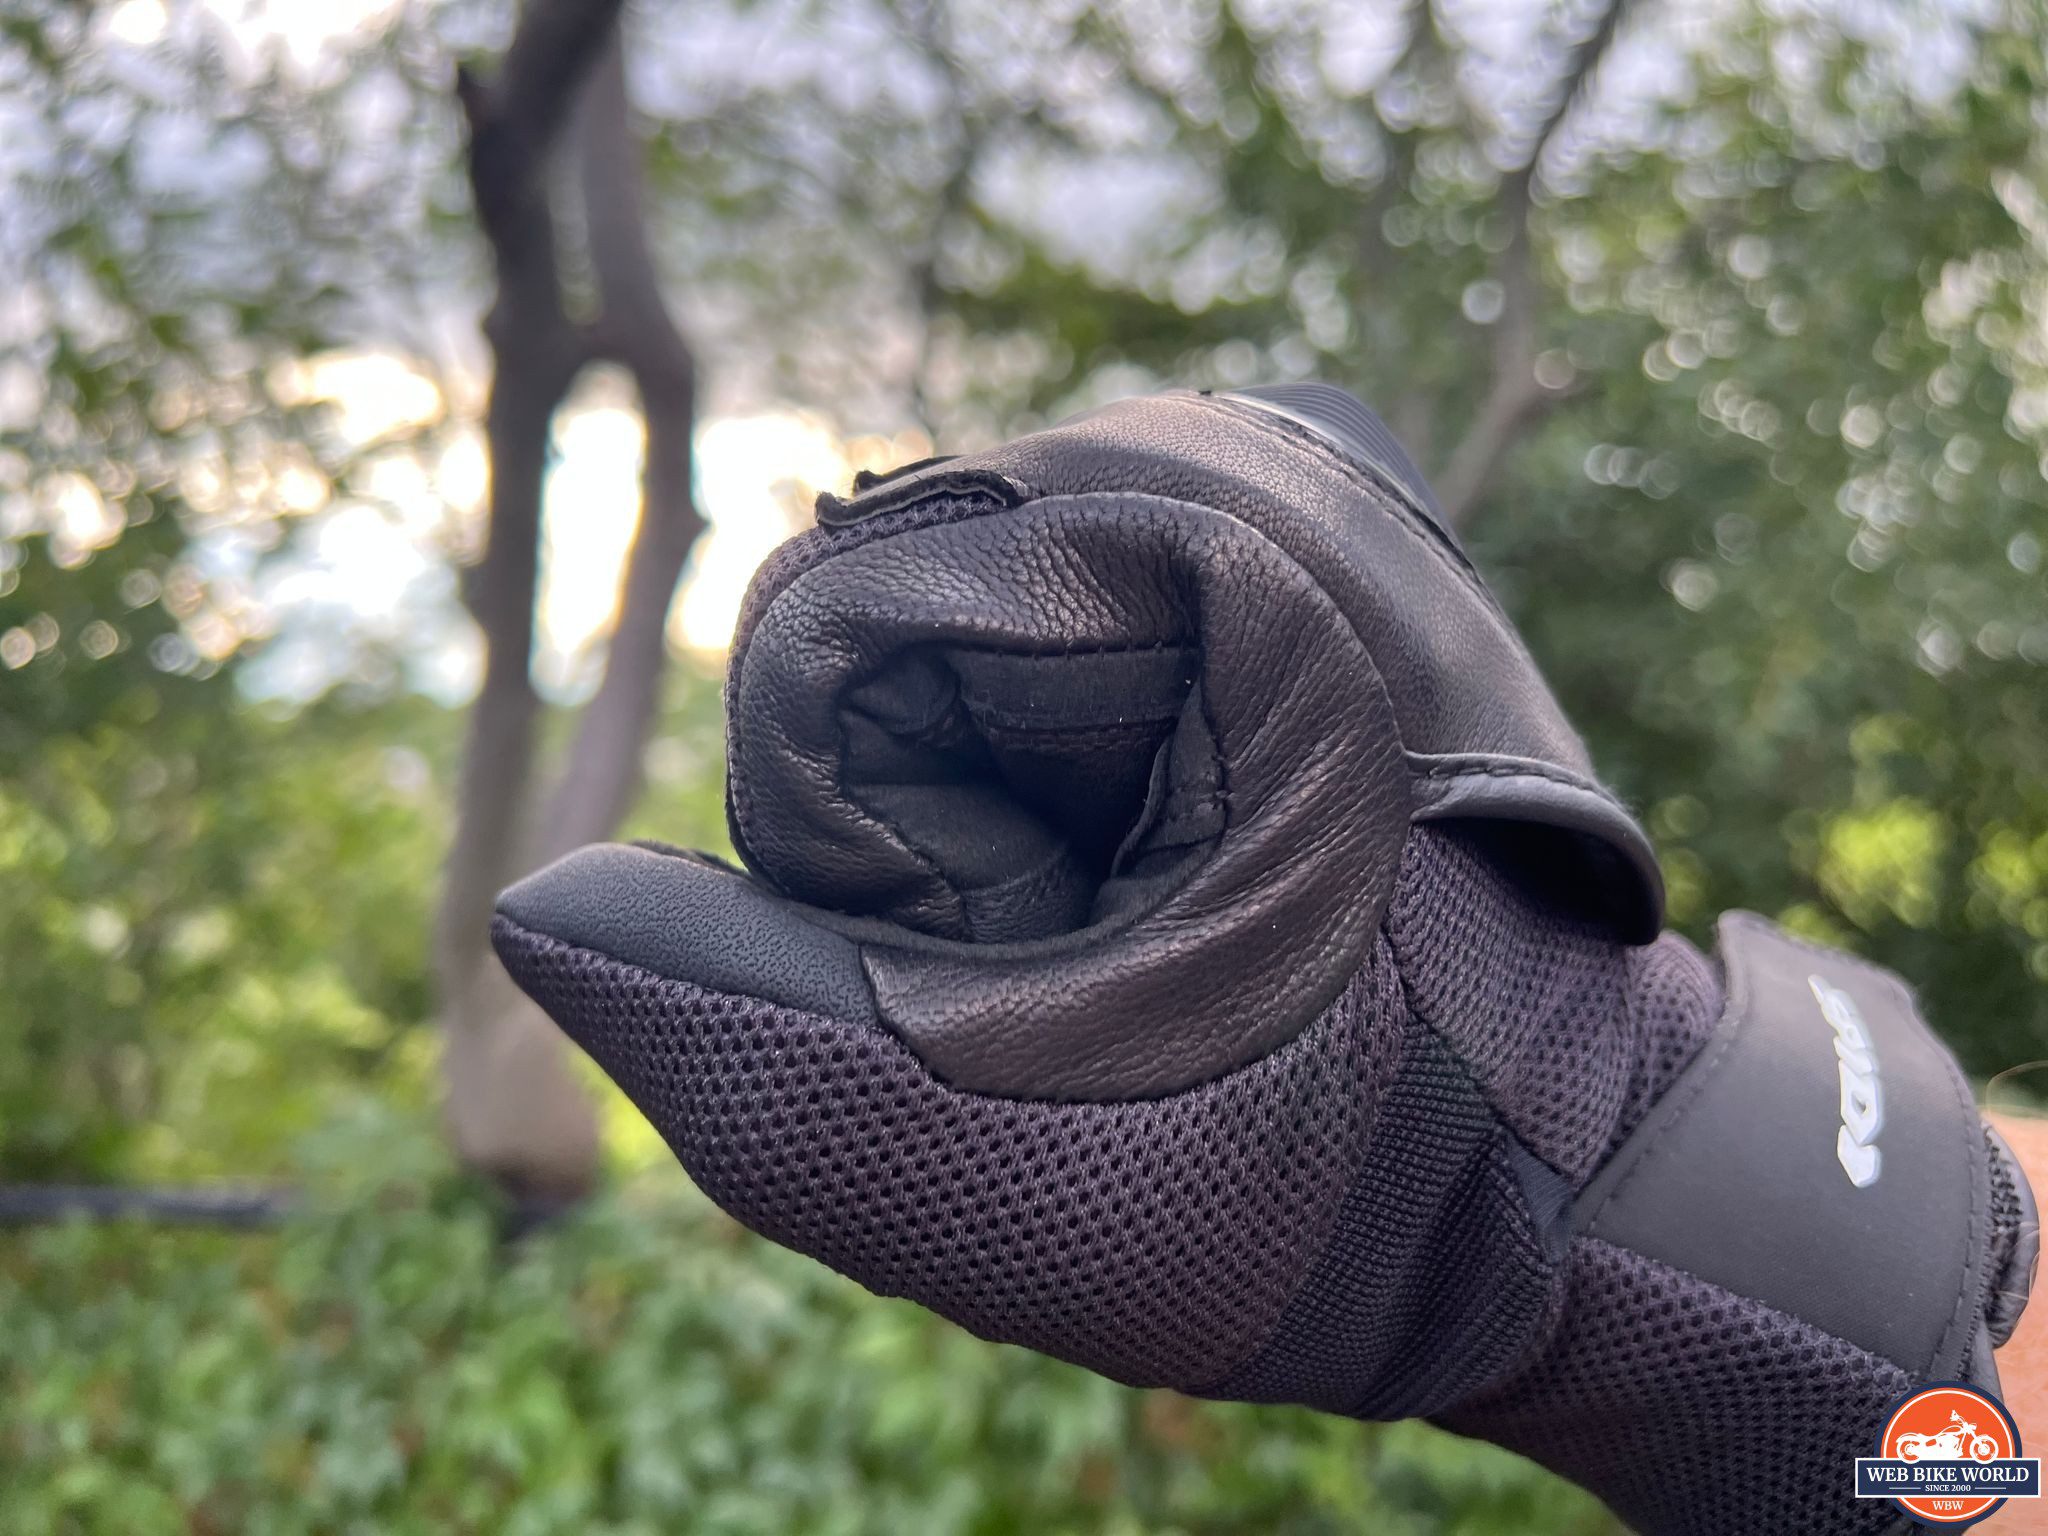 Clenched fist with Spidi Nkd H2Out Gloves